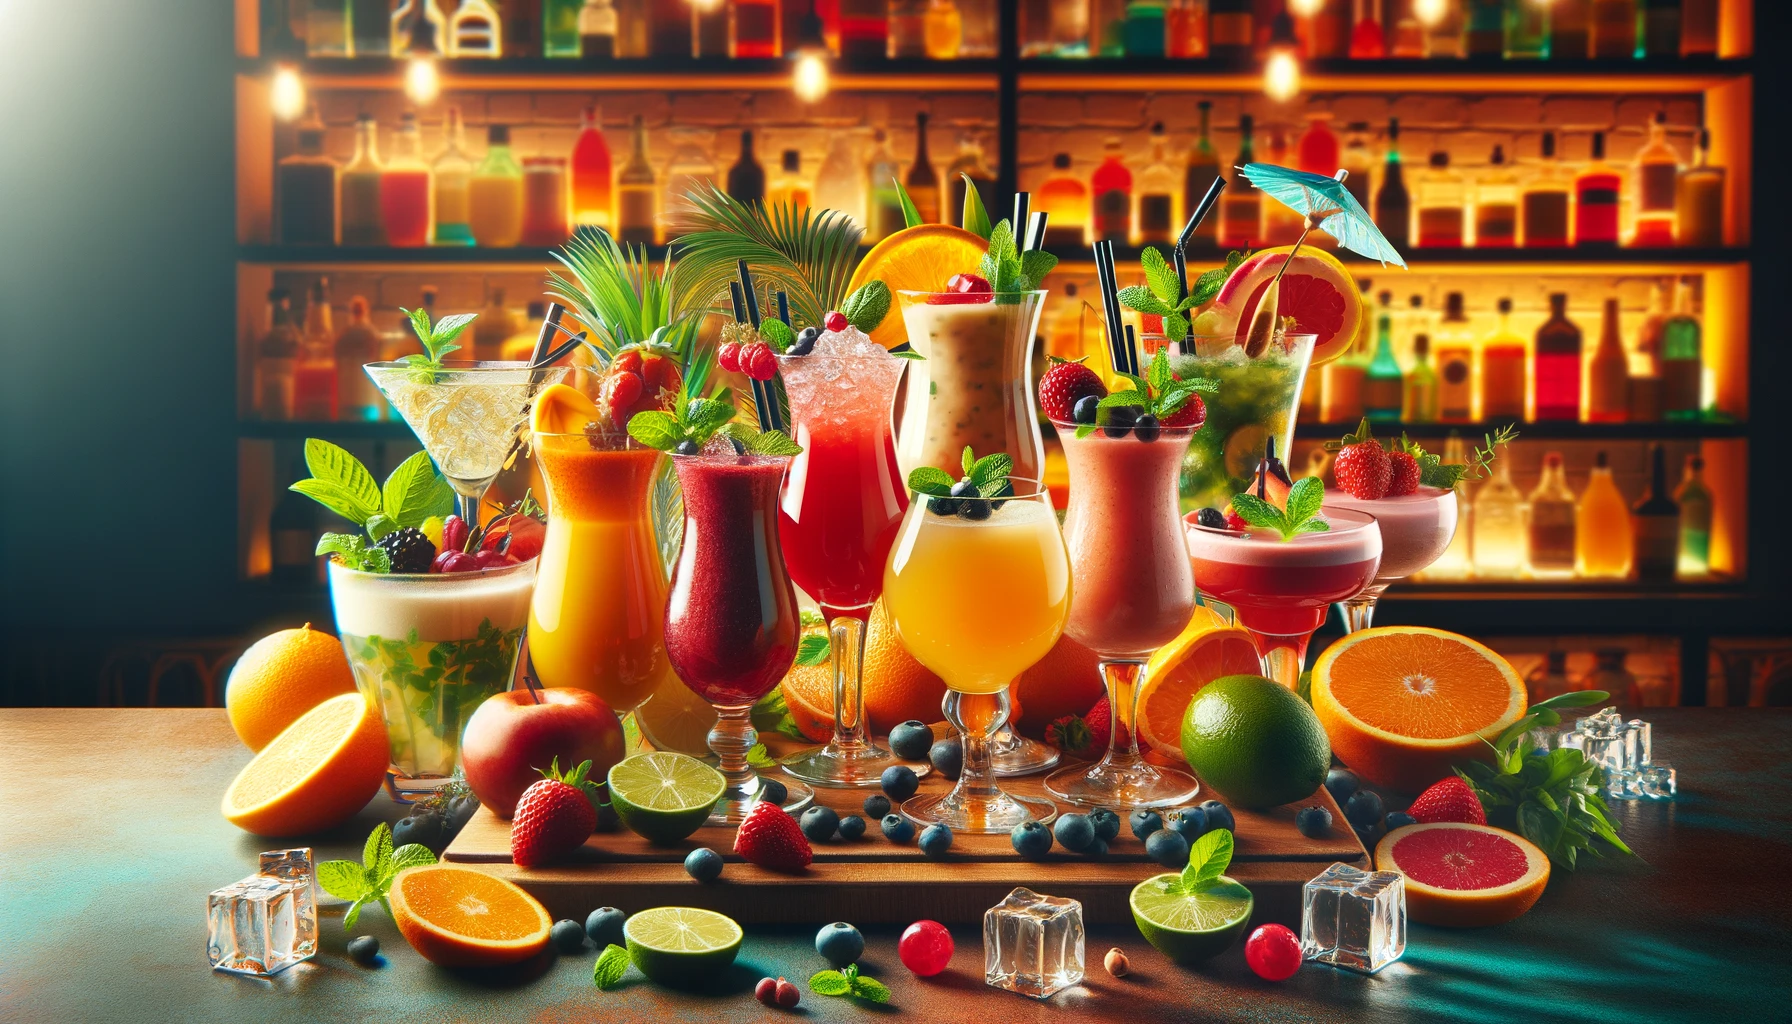  The scene features a variety of non-alcoholic beverages, like fruit juices, mocktails, and smoothies, beautifully presented in different glasses 